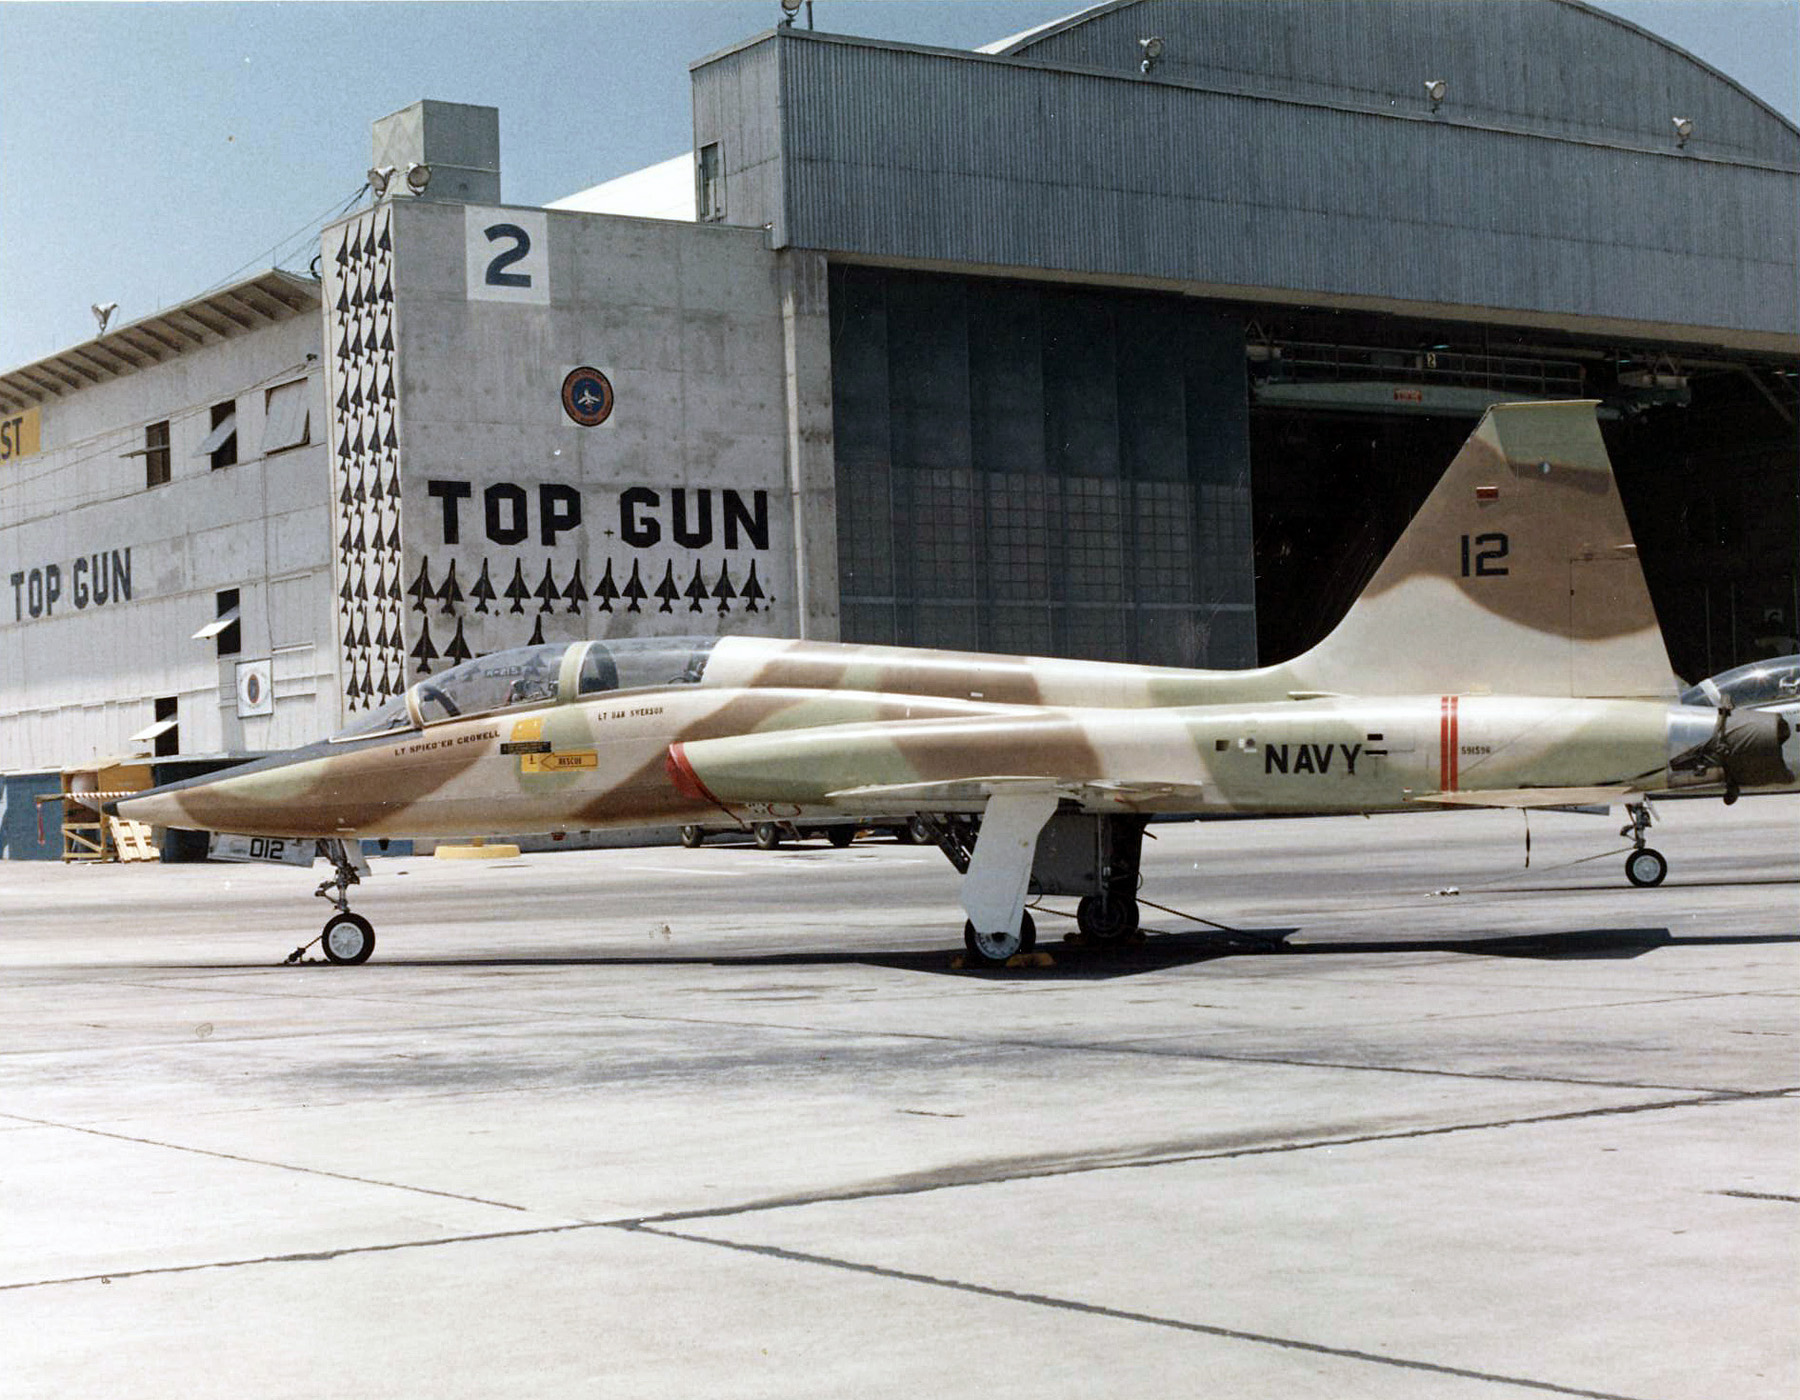 A T-38A Talon assigned to the Navy Fighter Weapons School pictured in front of the TOPGUN hangar on board Naval Air Station (NAS) Miramar, California, in 1974. The Talon was one of the aircraft types employed as an aggressor for training at the school. Note the silhouettes of MiG aircraft shot down during the Vietnam War painted on the hangar exterior. (Robert L. Lawson Photograph Collection, National Naval Aviation Museum)